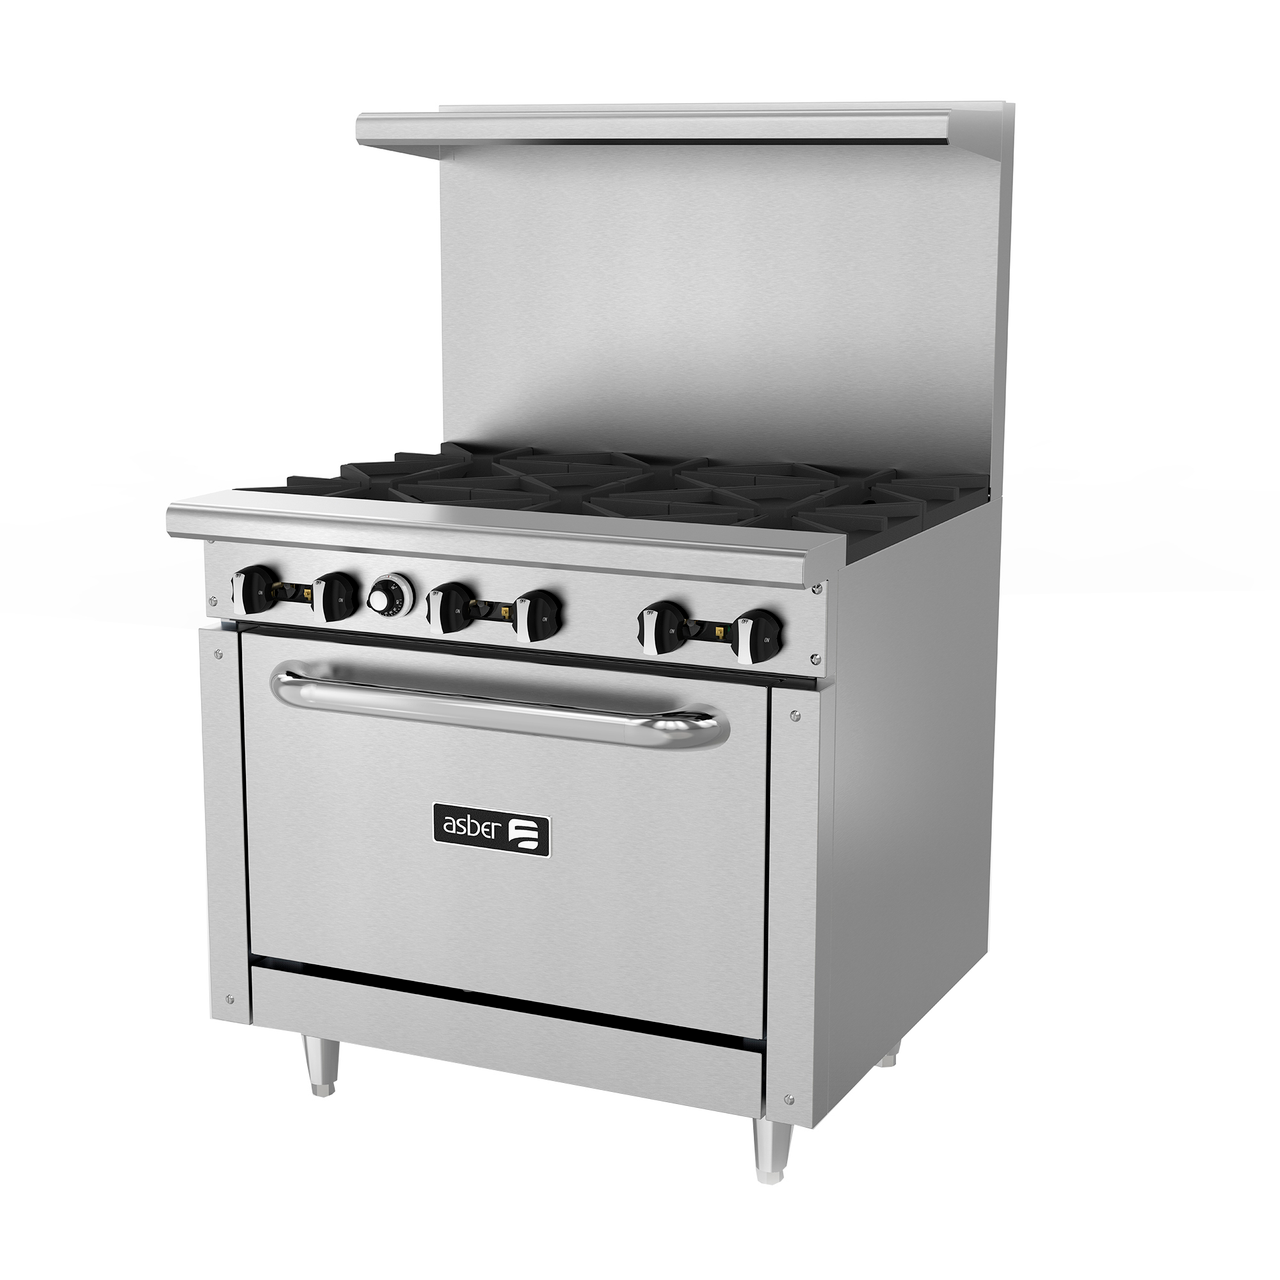 Restaurant Range, gas, 36"W, (6) 30,000 BTU open burners, removable cast iron grates, manual controls, full width grease trough, standard oven, stainless steel high shelf with reinforced backguard riser, pressure regulator, stainless steel front, sides, backguard & landing ledge, 6" adjustable steel feet, 210,000 BTU, cETLus, Made in North America